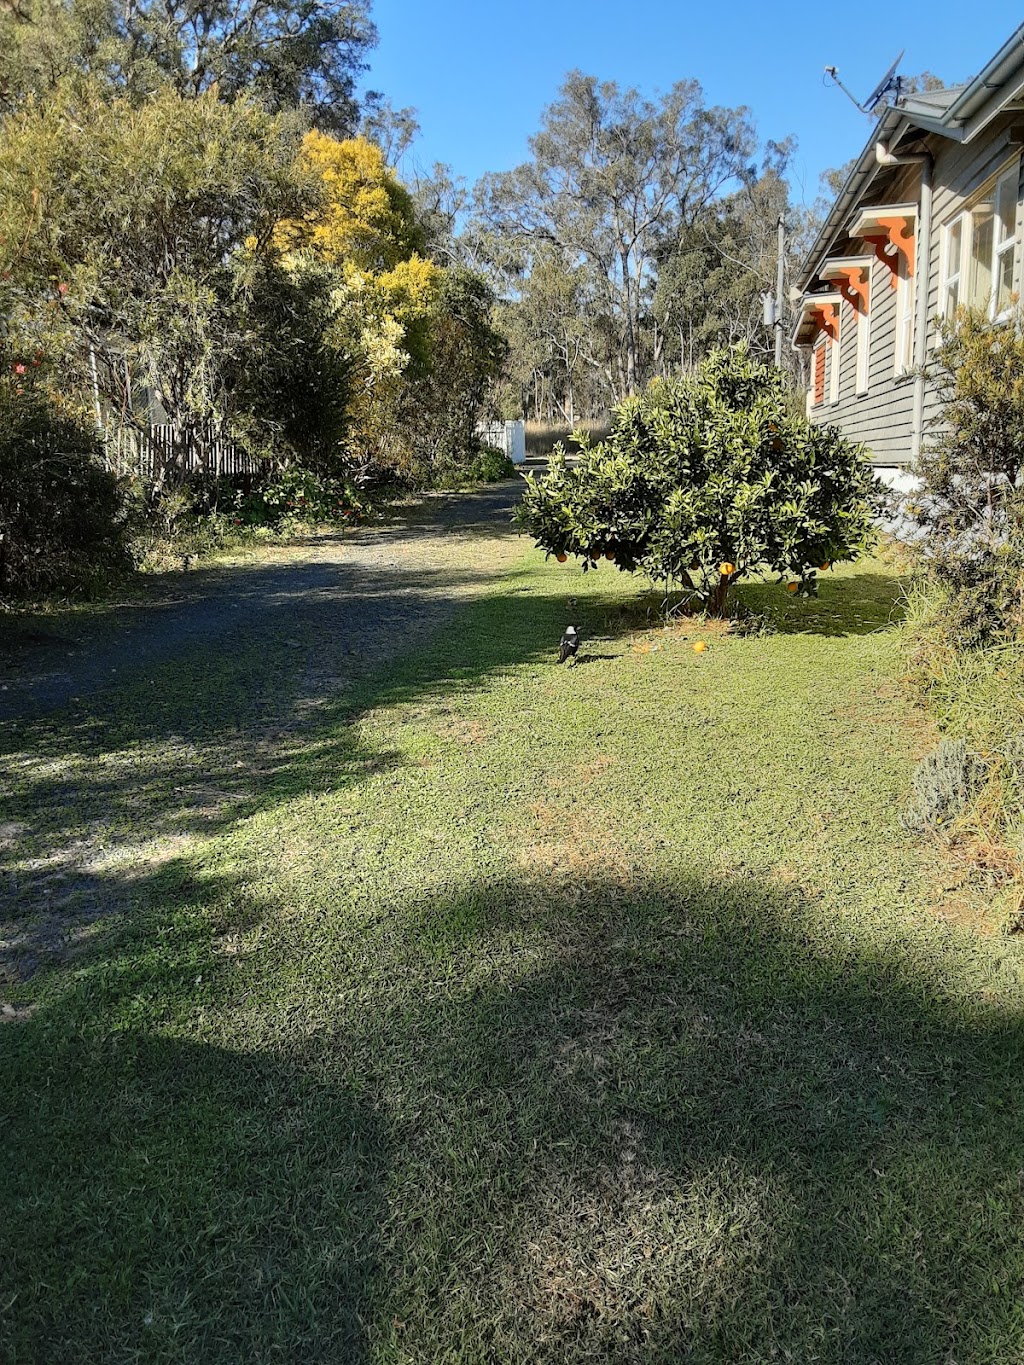 Bretts Property Maintenance From the Ground Up | A3 Highway, Crows Nest QLD 4355, Australia | Phone: 0491 600 408